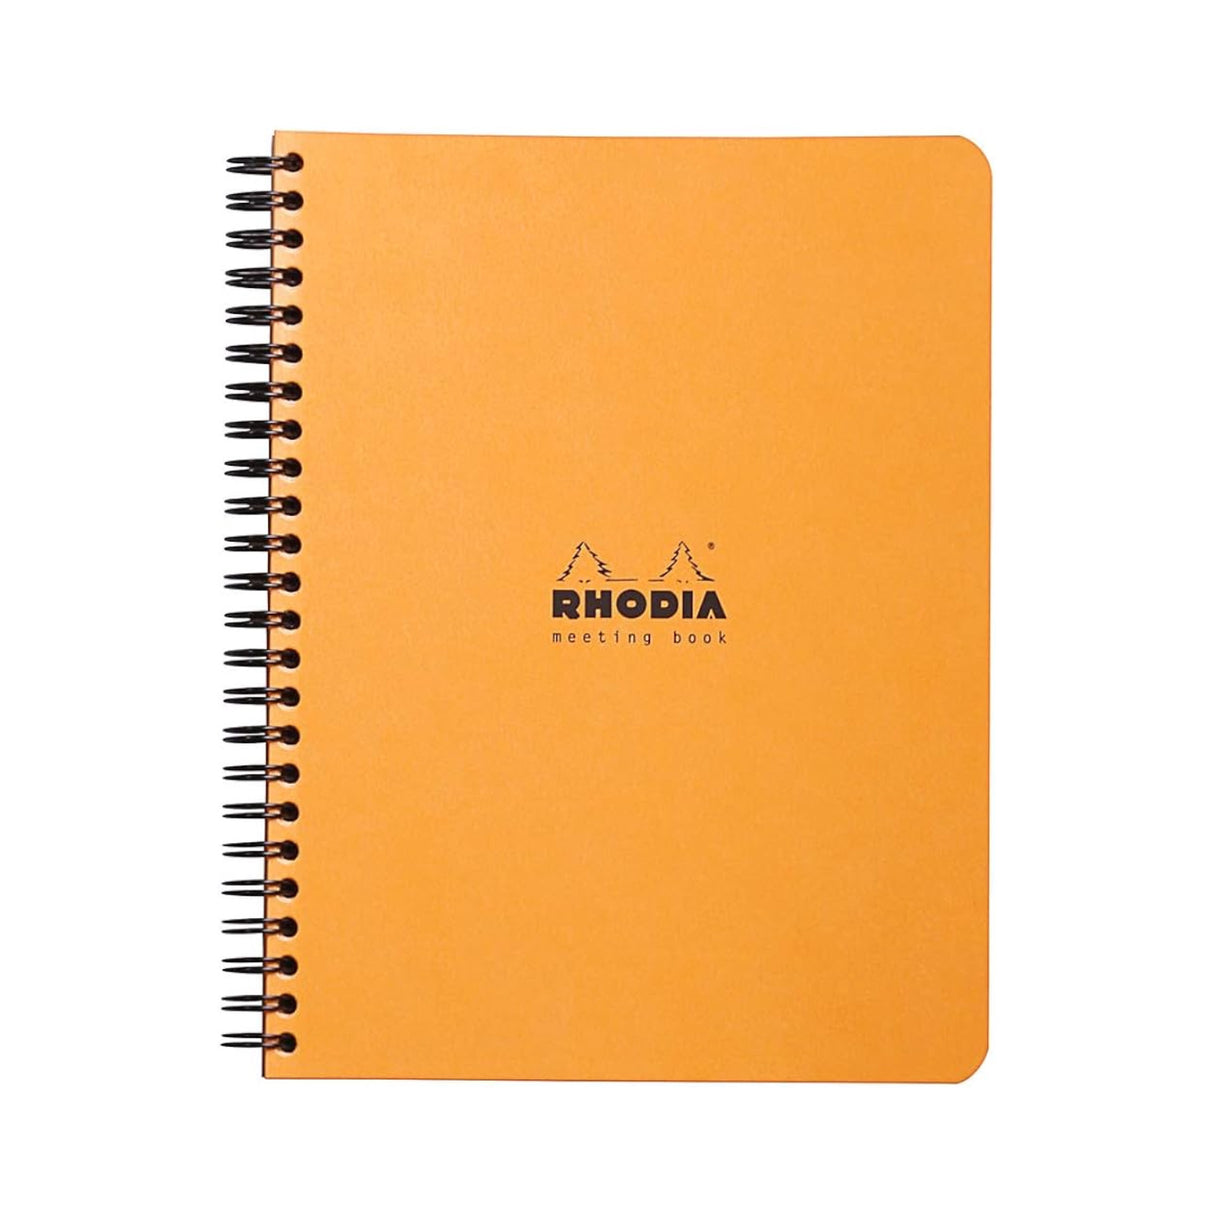 RHODIA ORANGE MEETING LINED WIRED BOOK 14.8 x 21cm (6 1/2 x 8 1/4)